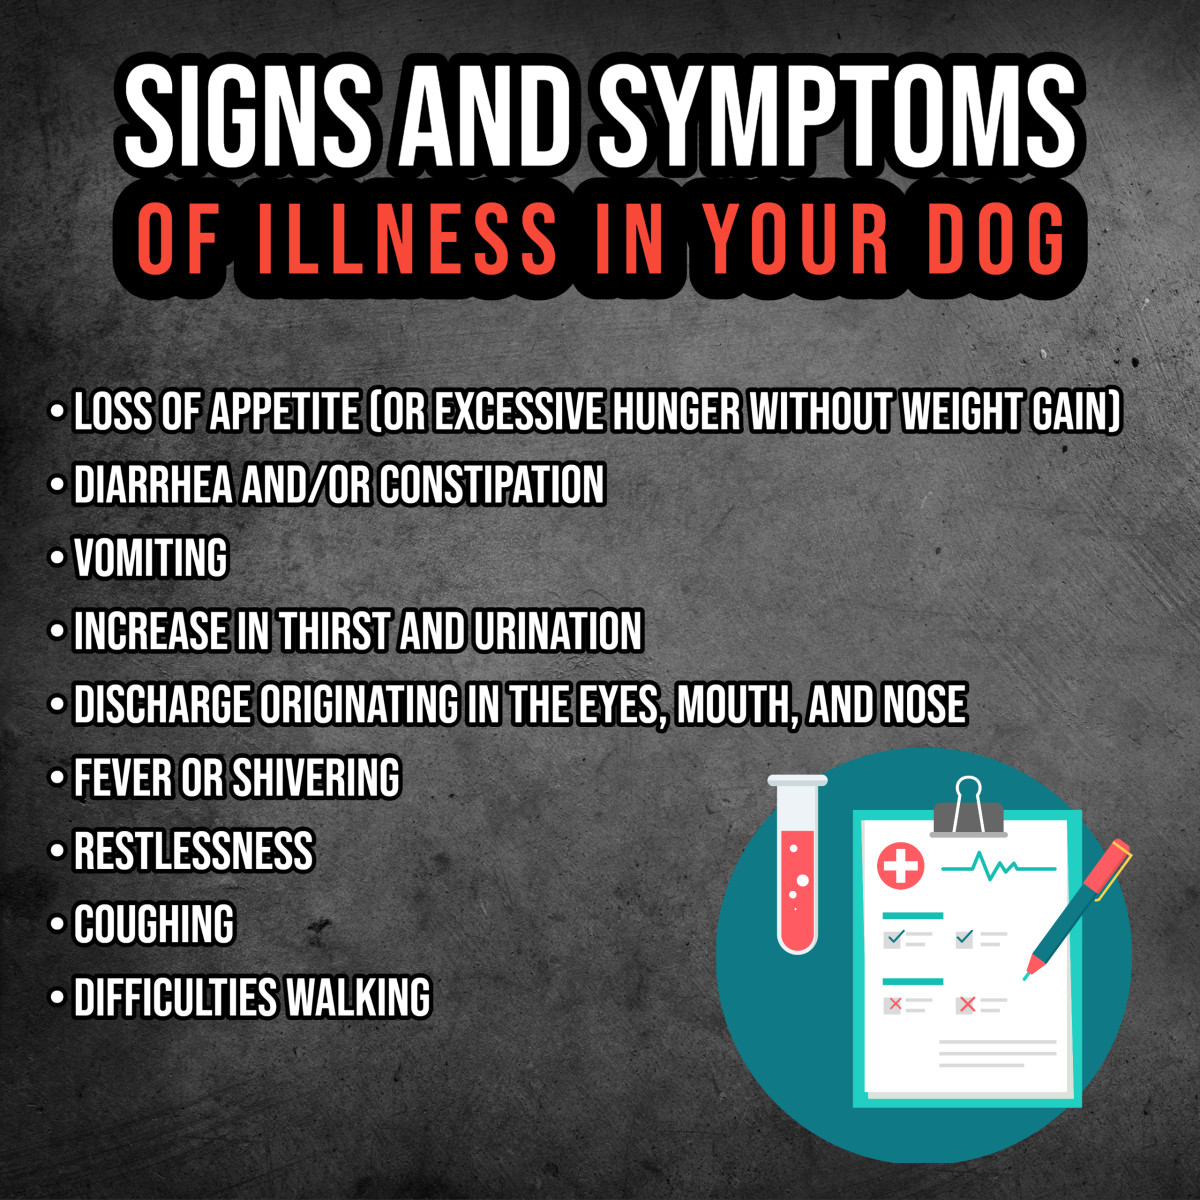 Signs and symptoms of illness in the Curly-Coated Retriever.